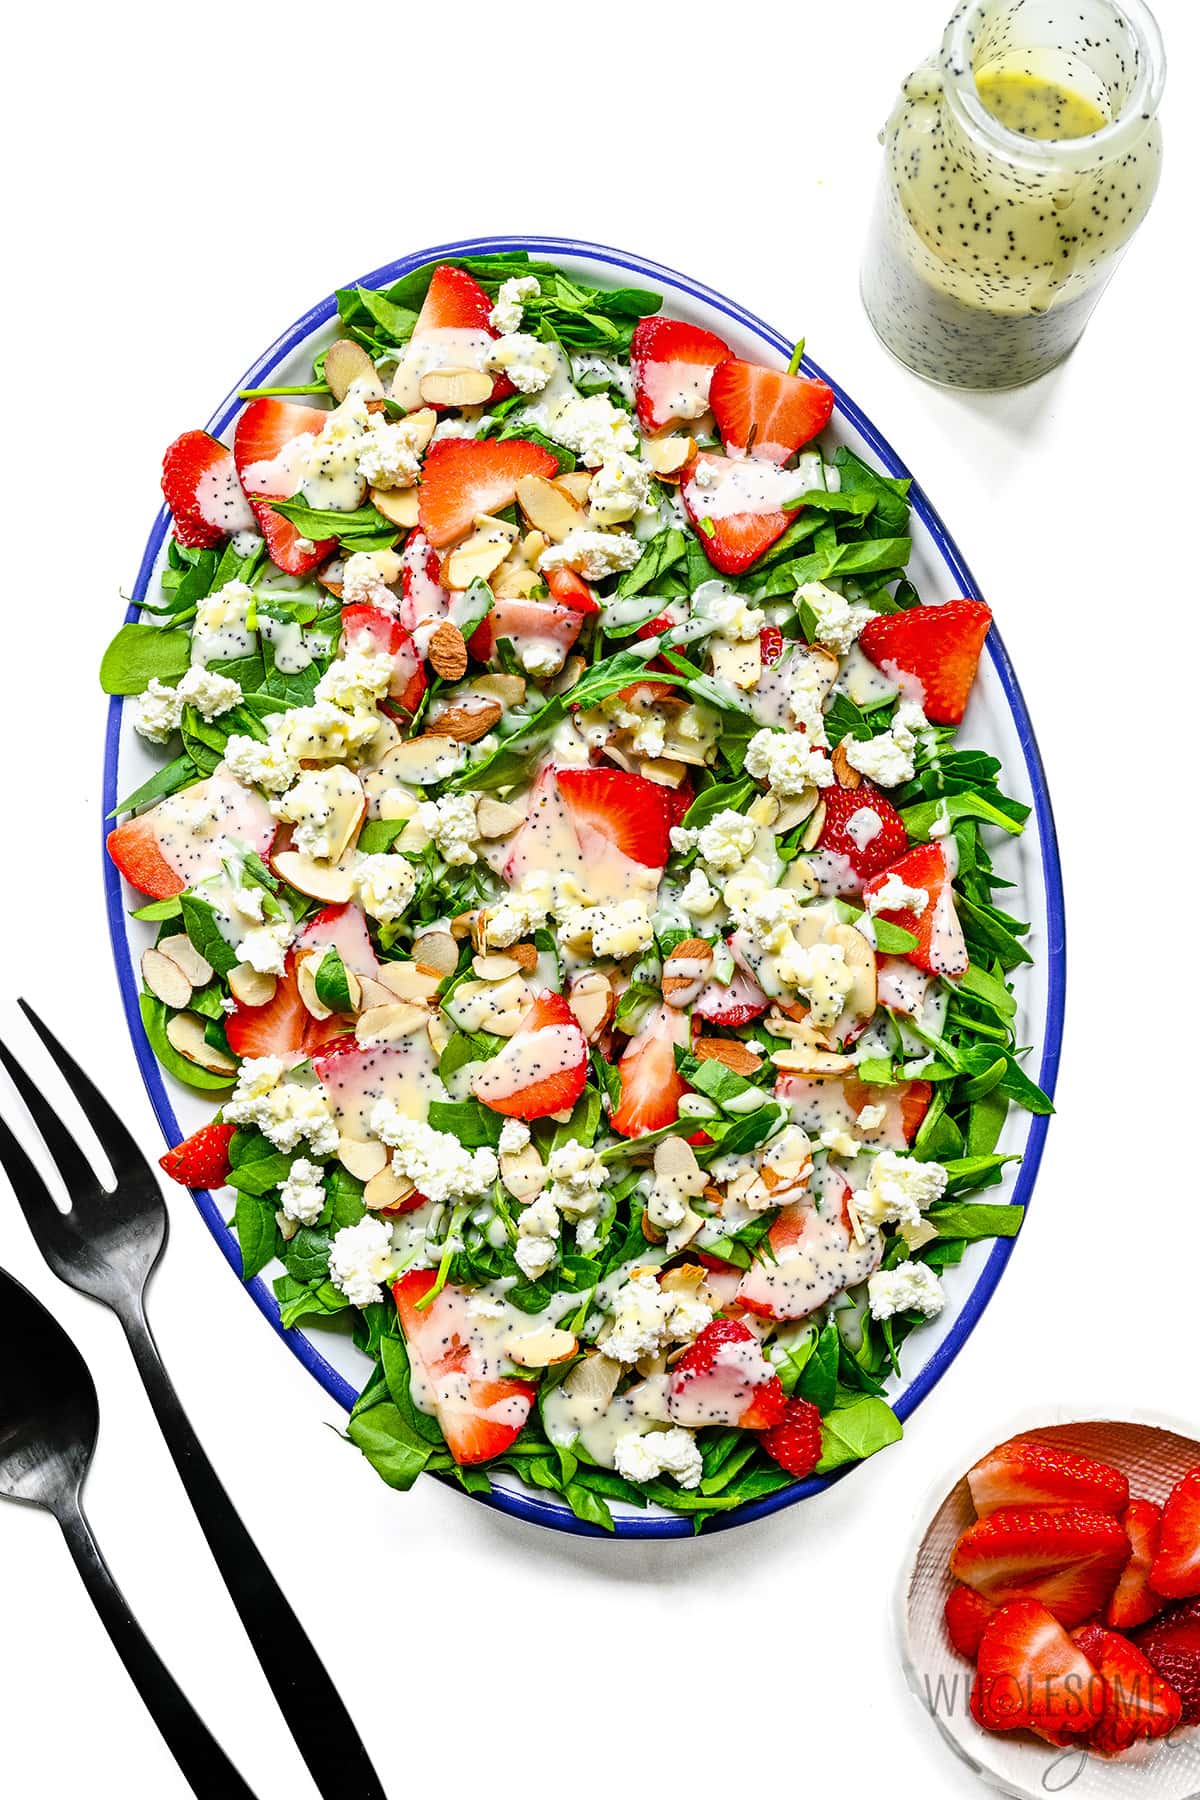 Strawberry spinach salad in a serving bowl next to forks, dressing, and strawberries.